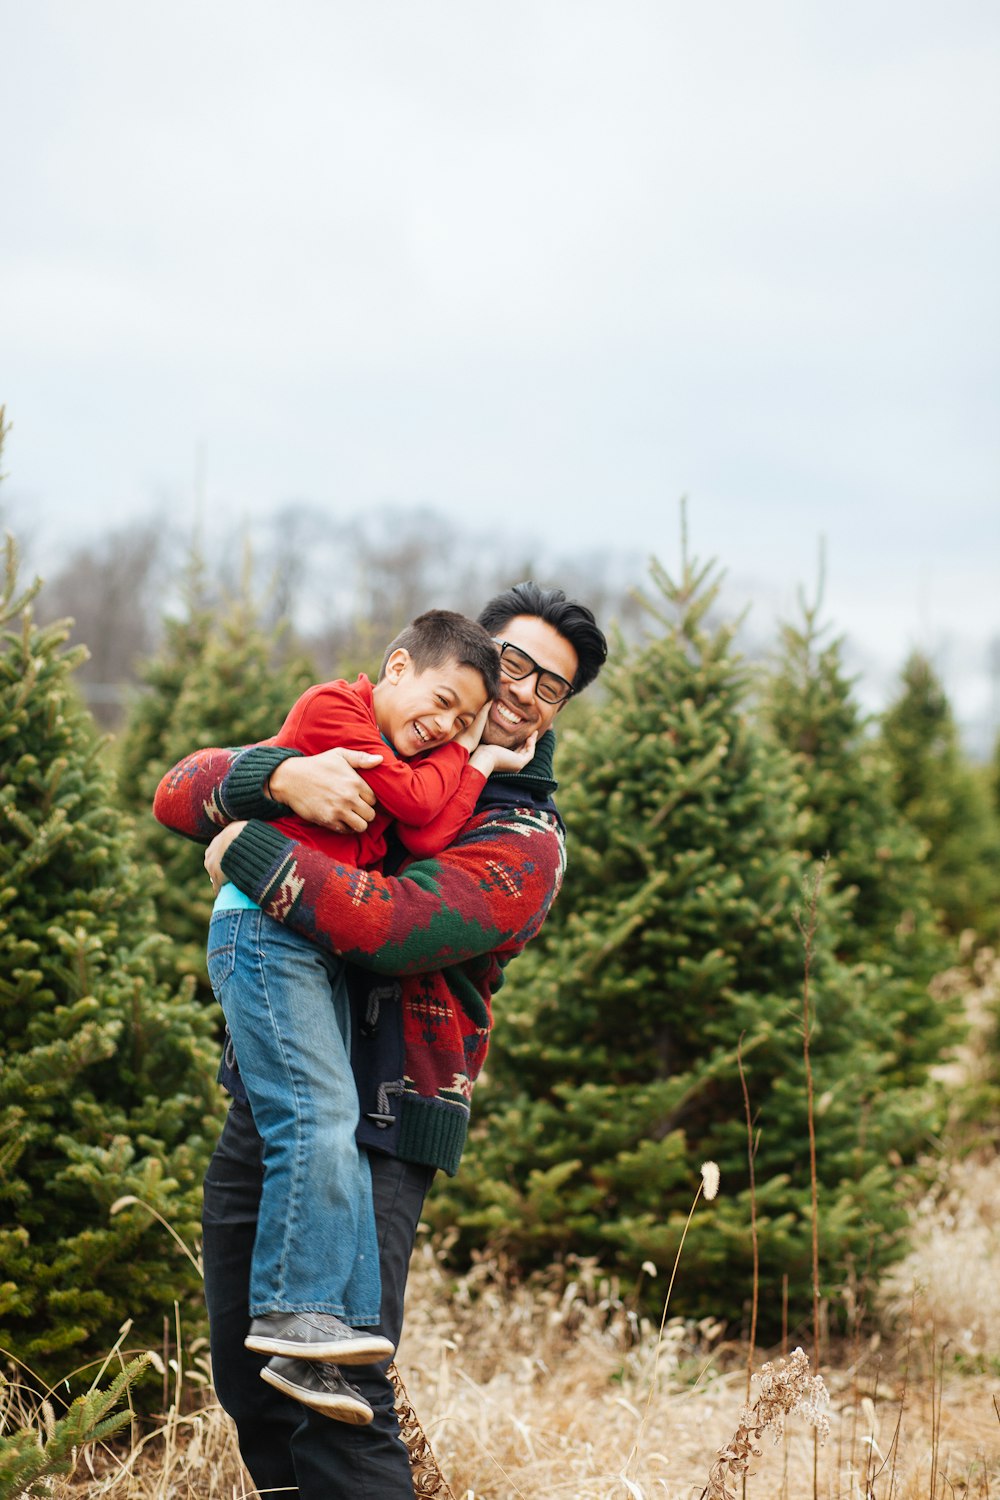 man carrying boy while standing and smiling near pine trees